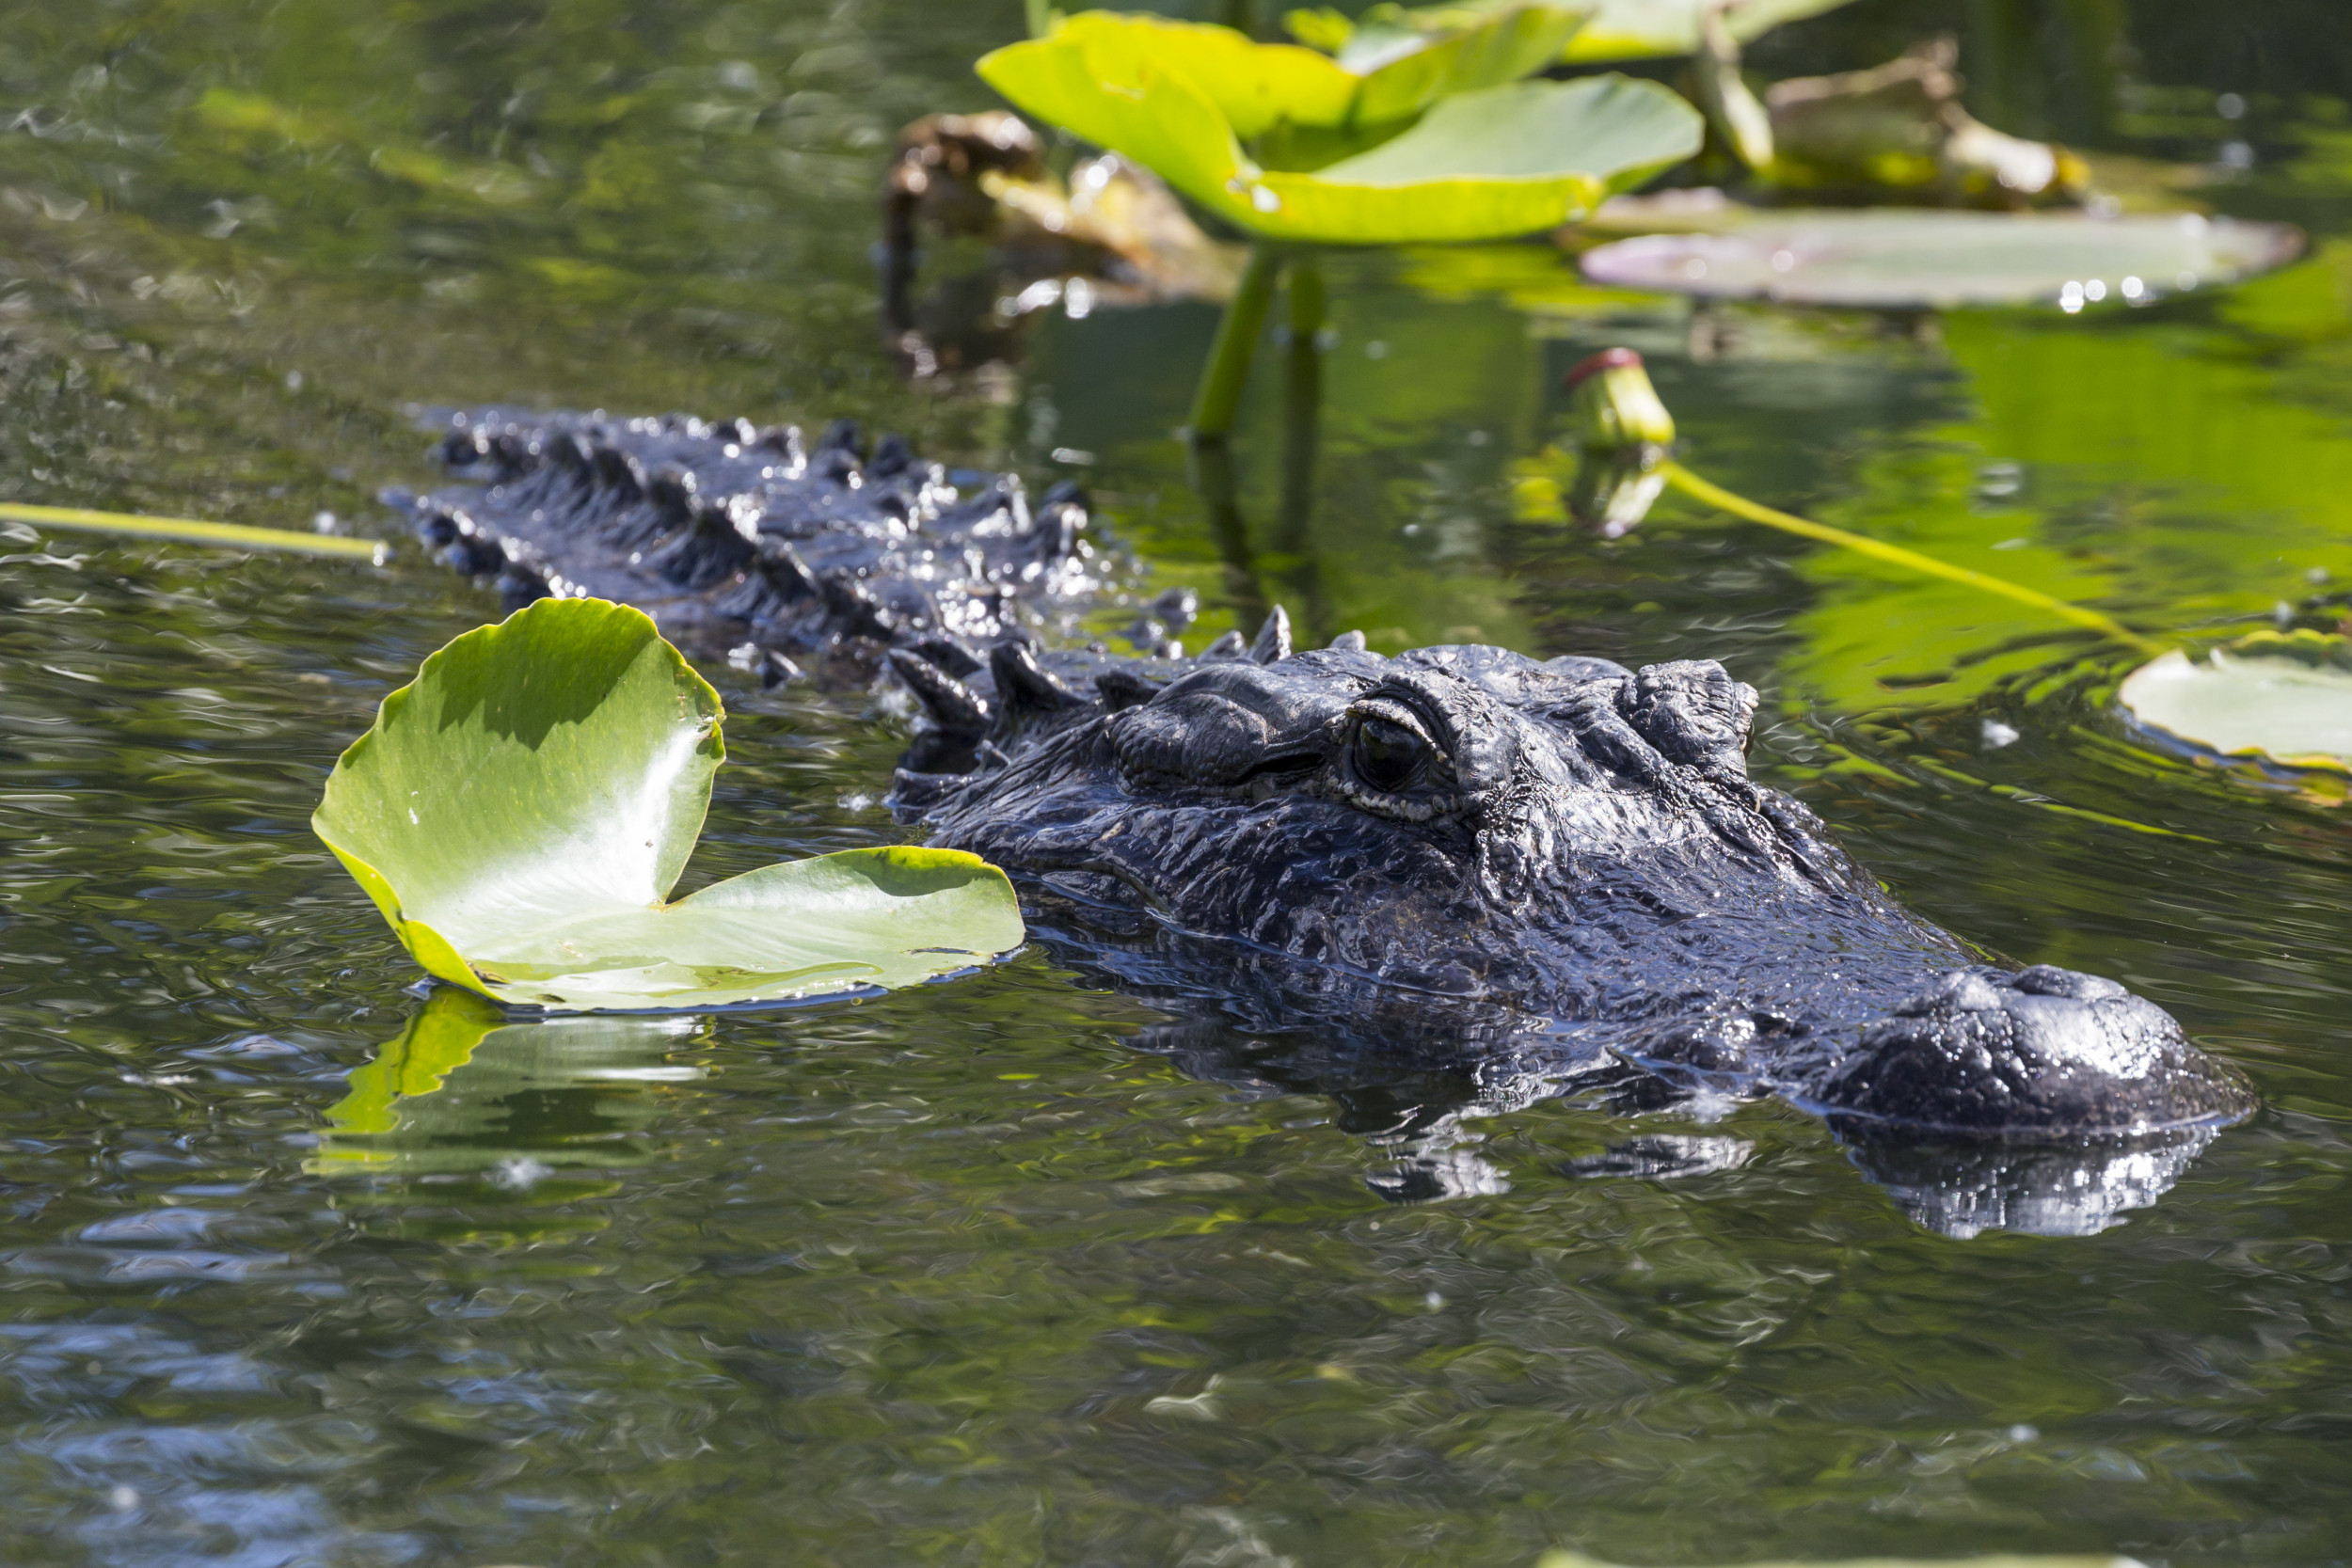 Florida Woman, 74, Fights Off Alligator to Save Pet Dog From Attack